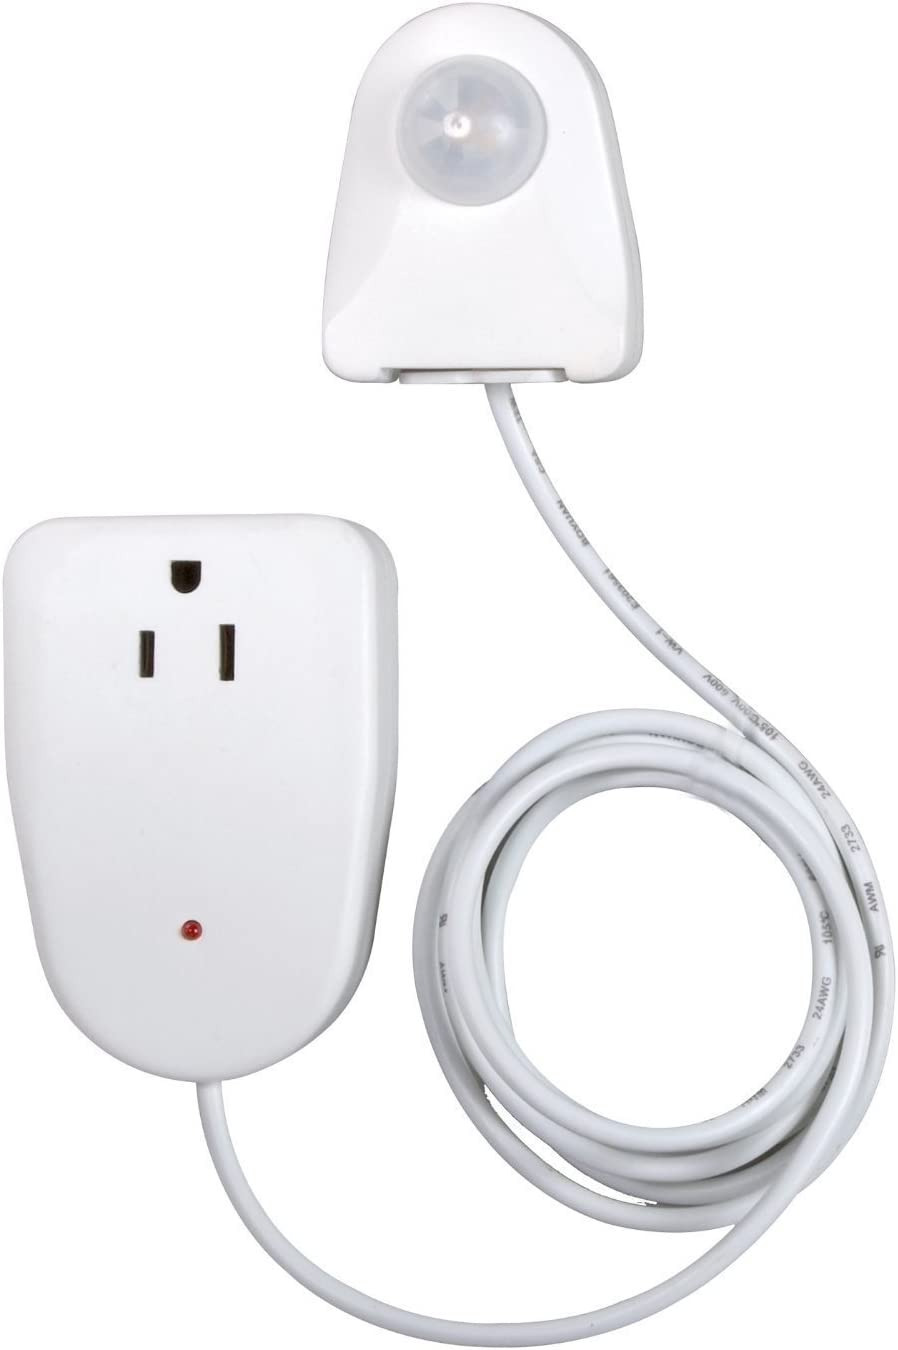 MLC12BC-4 Indoor Plug-In Corded Motion Activated Light Control, 1 Count (Pack of